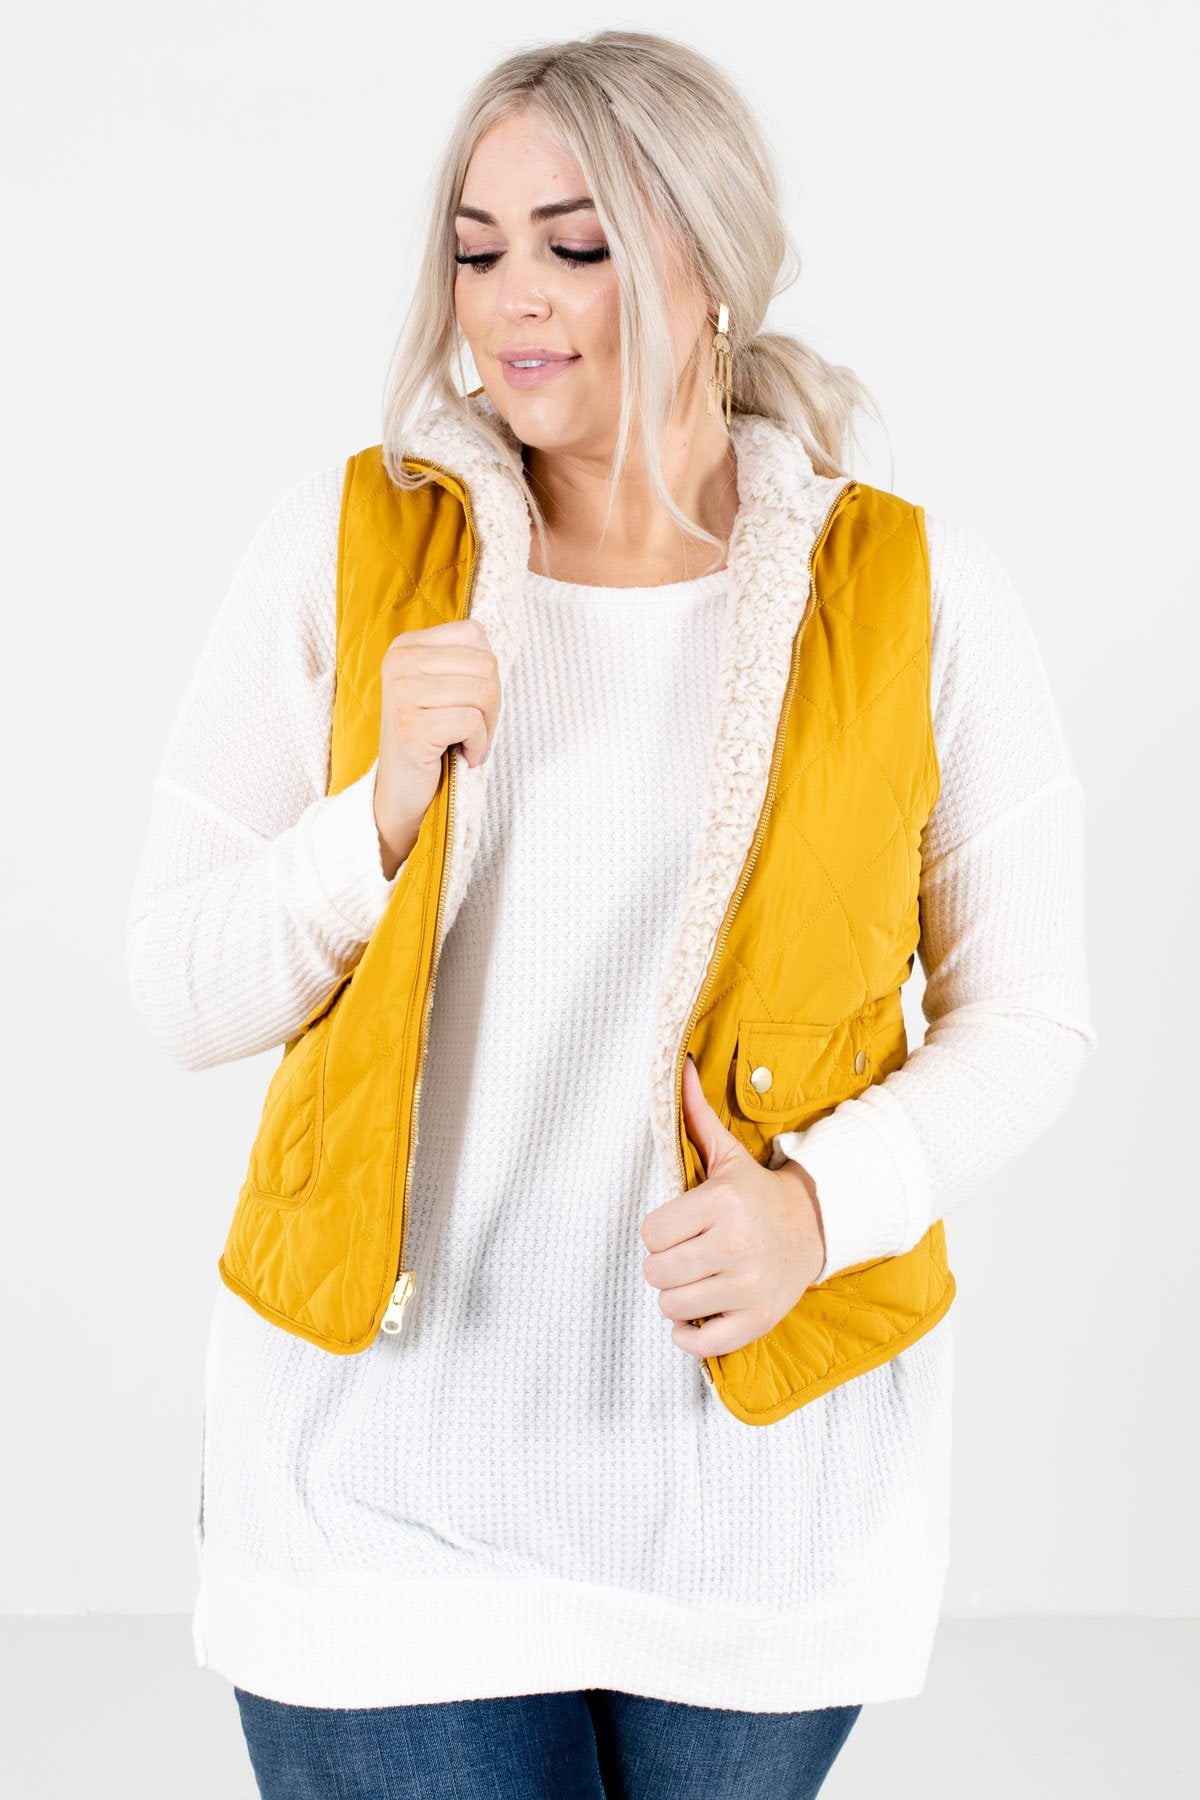 Mustard Yellow Cute and Comfortable Boutique Vests for Women